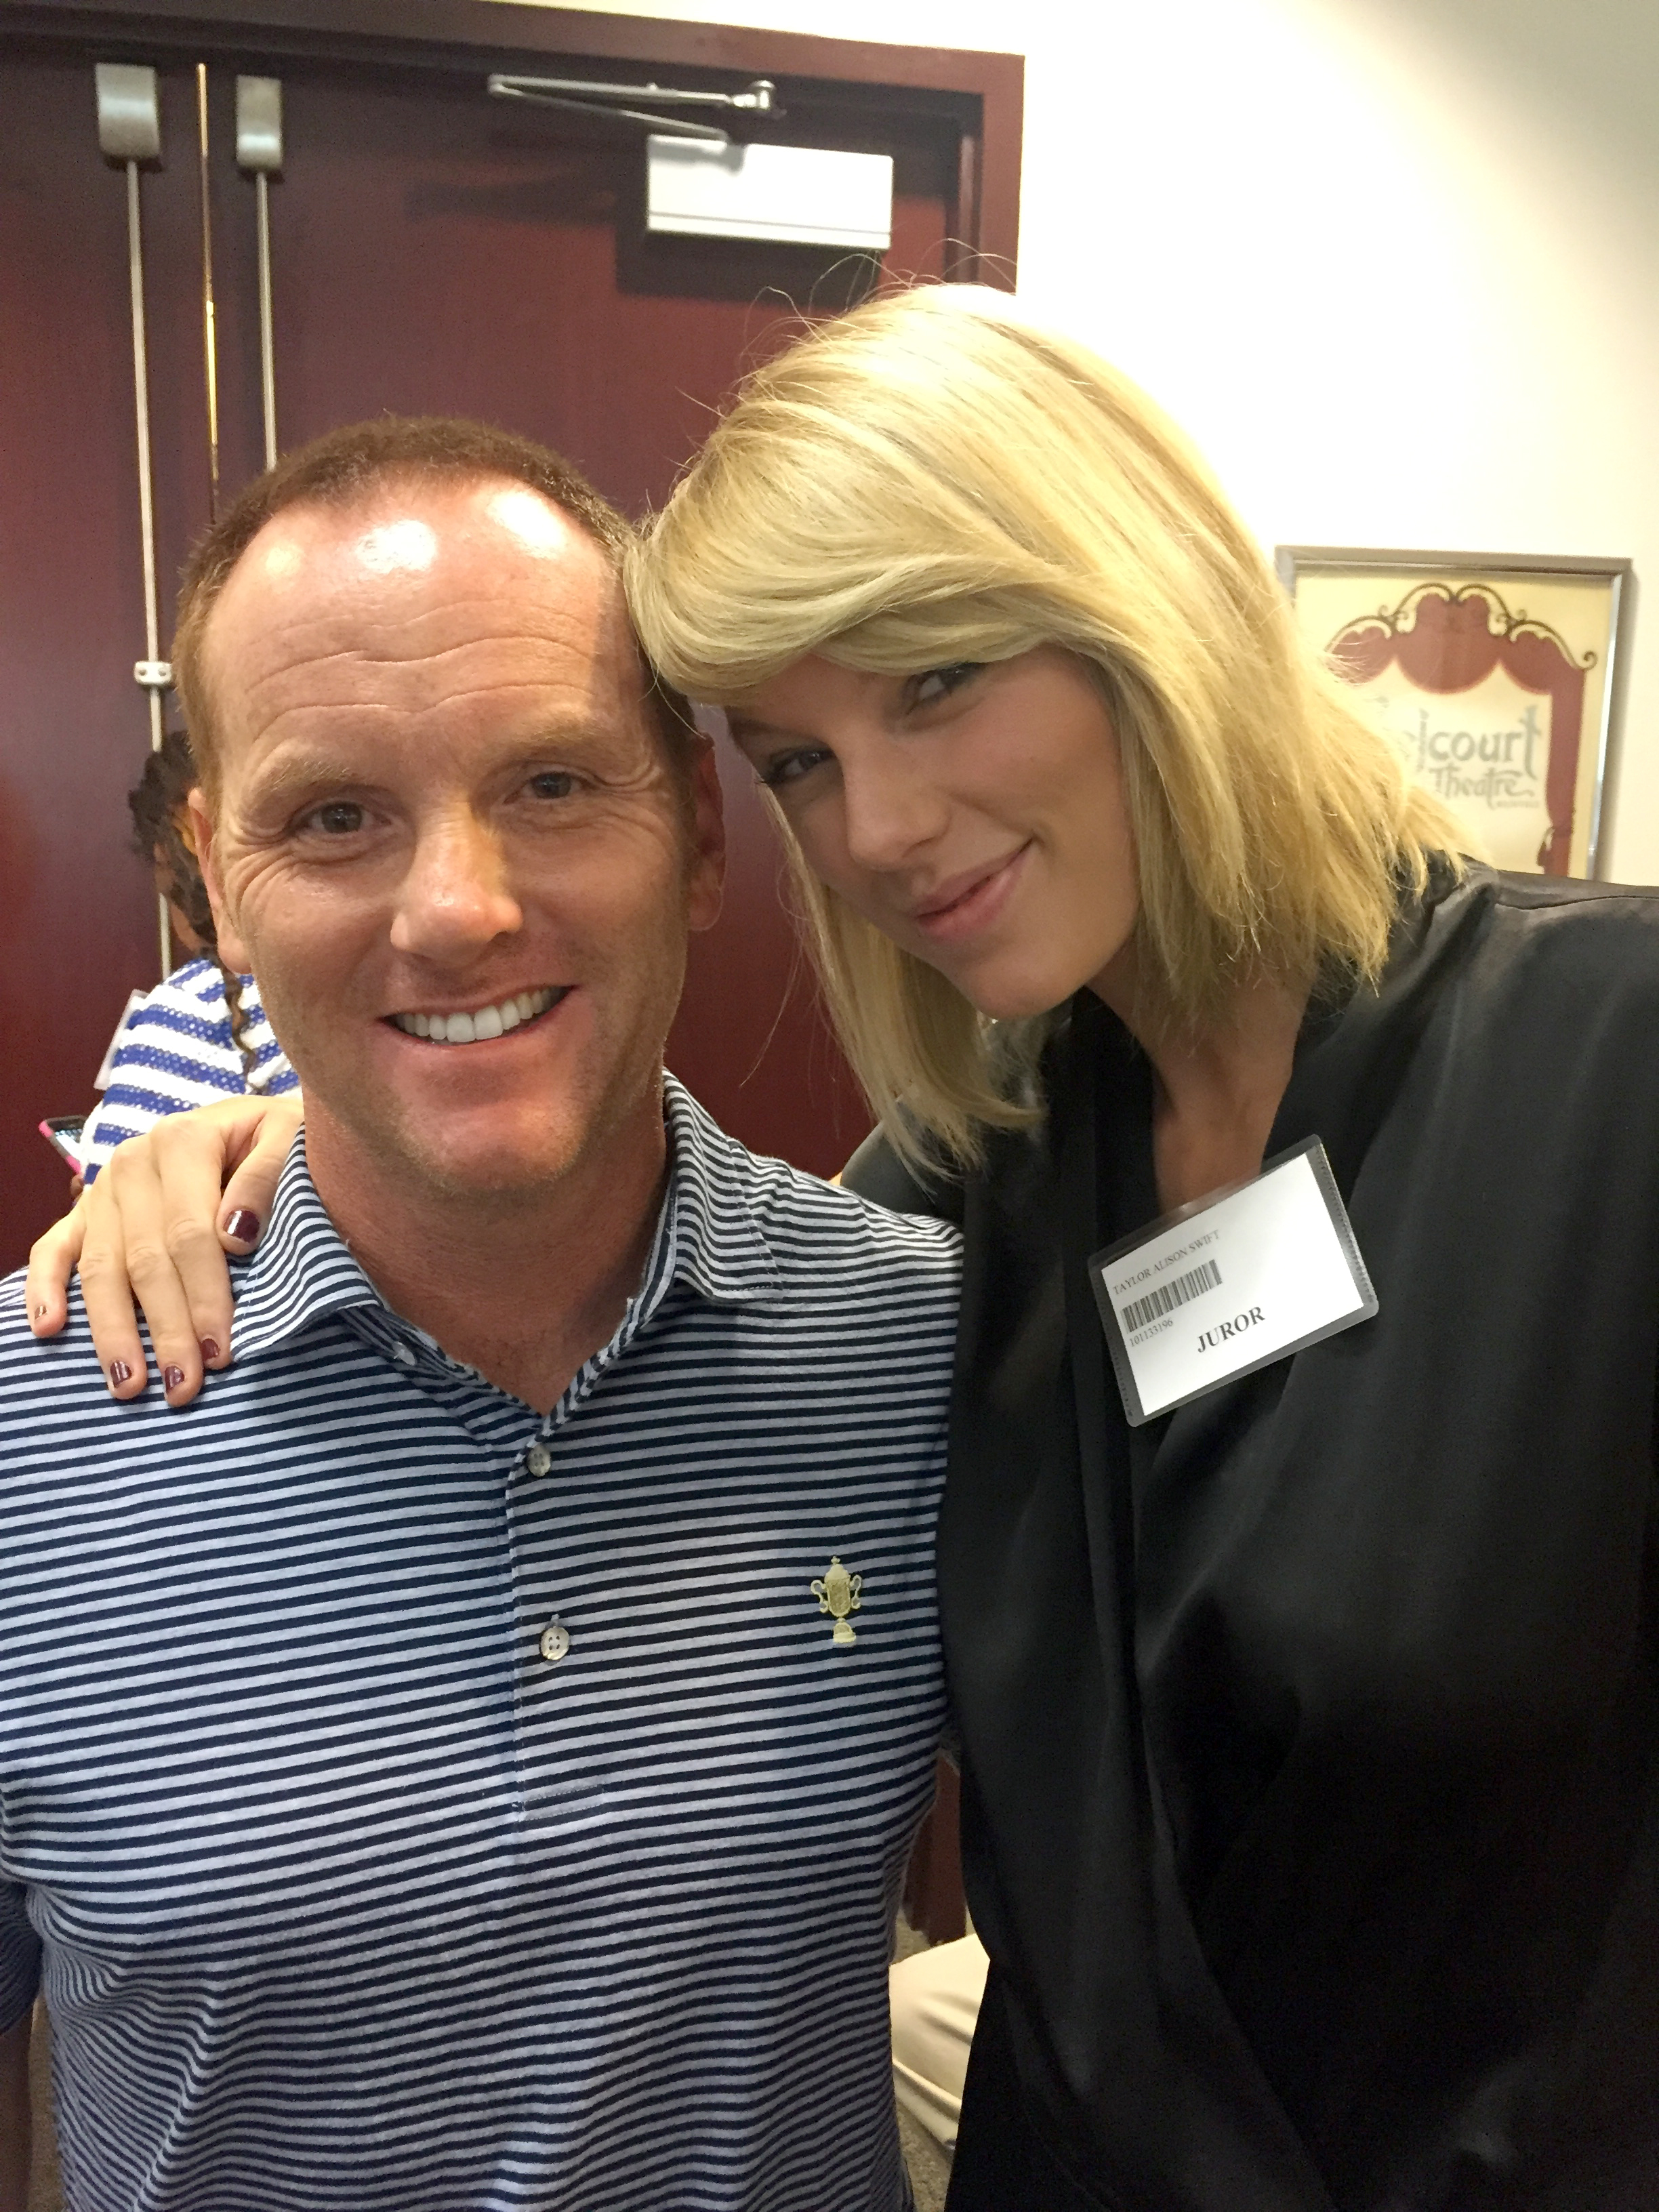 In this image provided by Bryan Merville, potential juror pop star Taylor Swift, right, poses for a photo with Bryan Merville in a courthouse waiting area in Nashville, Tenn., Monday, Aug. 29, 2016. A Nashville judge dismissed Swift as a potential juror in an aggravated rape and kidnapping case (Bryan Merville—AP)